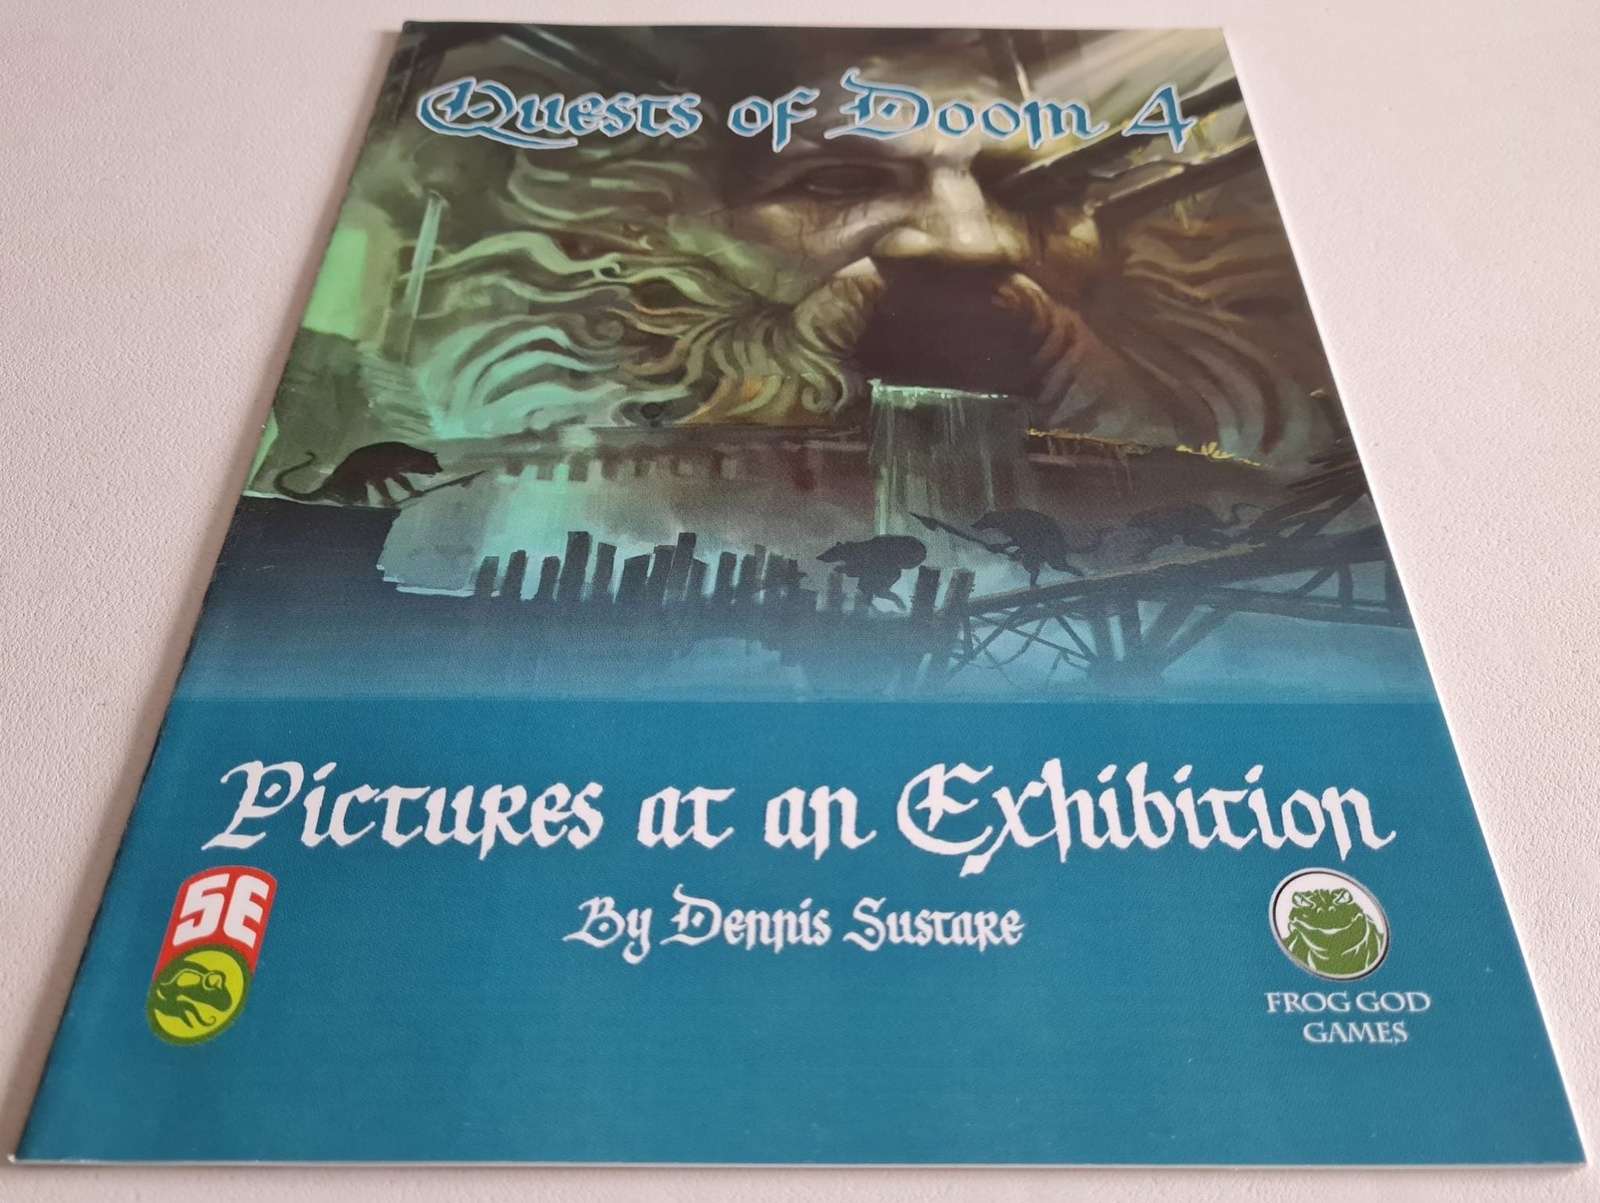 Quests of Doom 4: Pictures at an Exhibition: Dungeons & Dragons 5th Ed